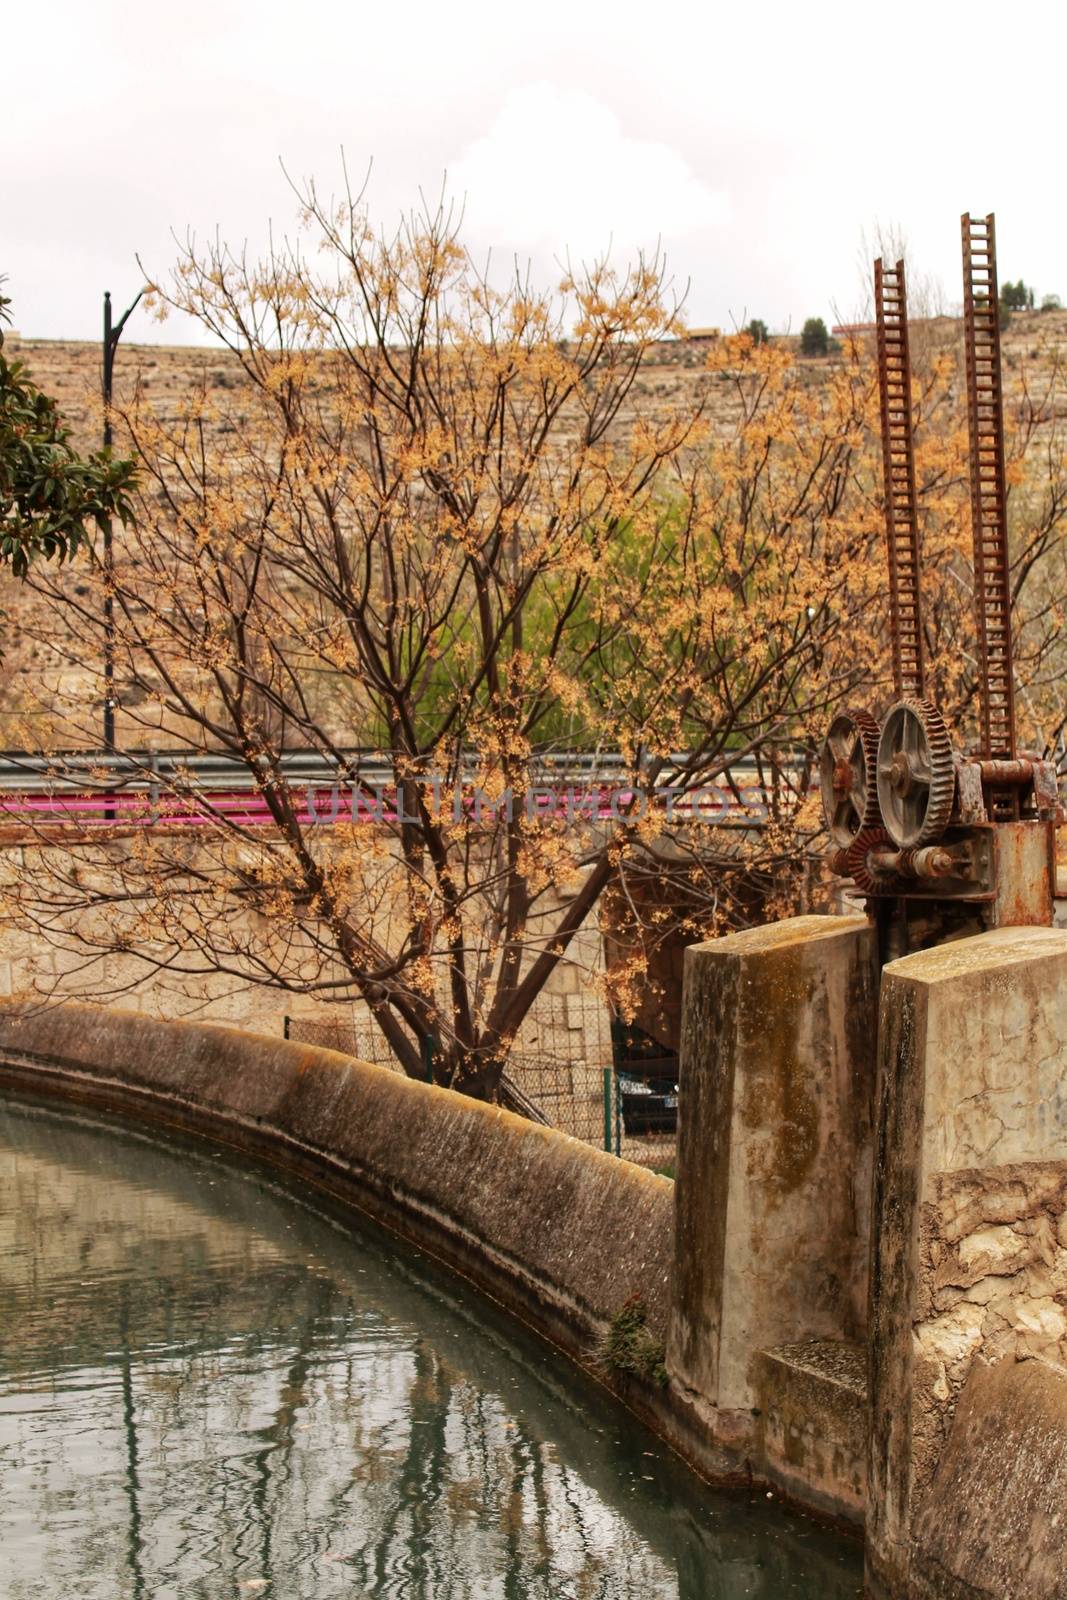 Old hydraulic closure system in the river Jucar in Spain by soniabonet